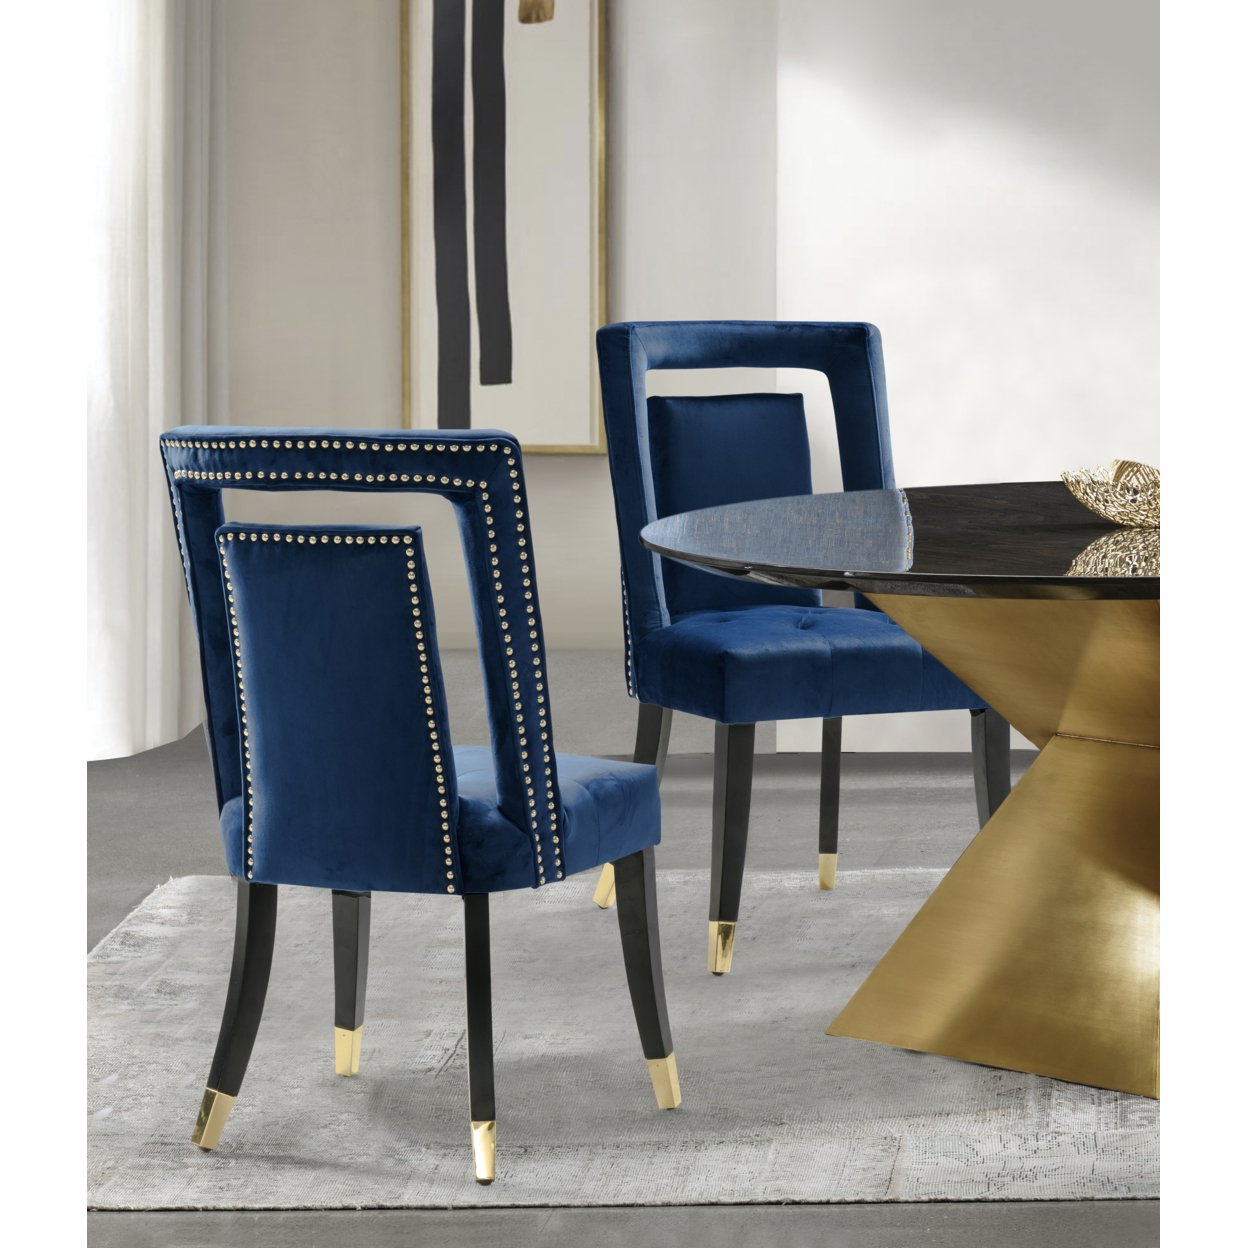 Iconic Home Elsa Dining Side Chair Velvet Upholstered Nailhead Trim Seat Espresso Finished Gold Tip Tapered Wood Legs, Set Of 2 - Navy